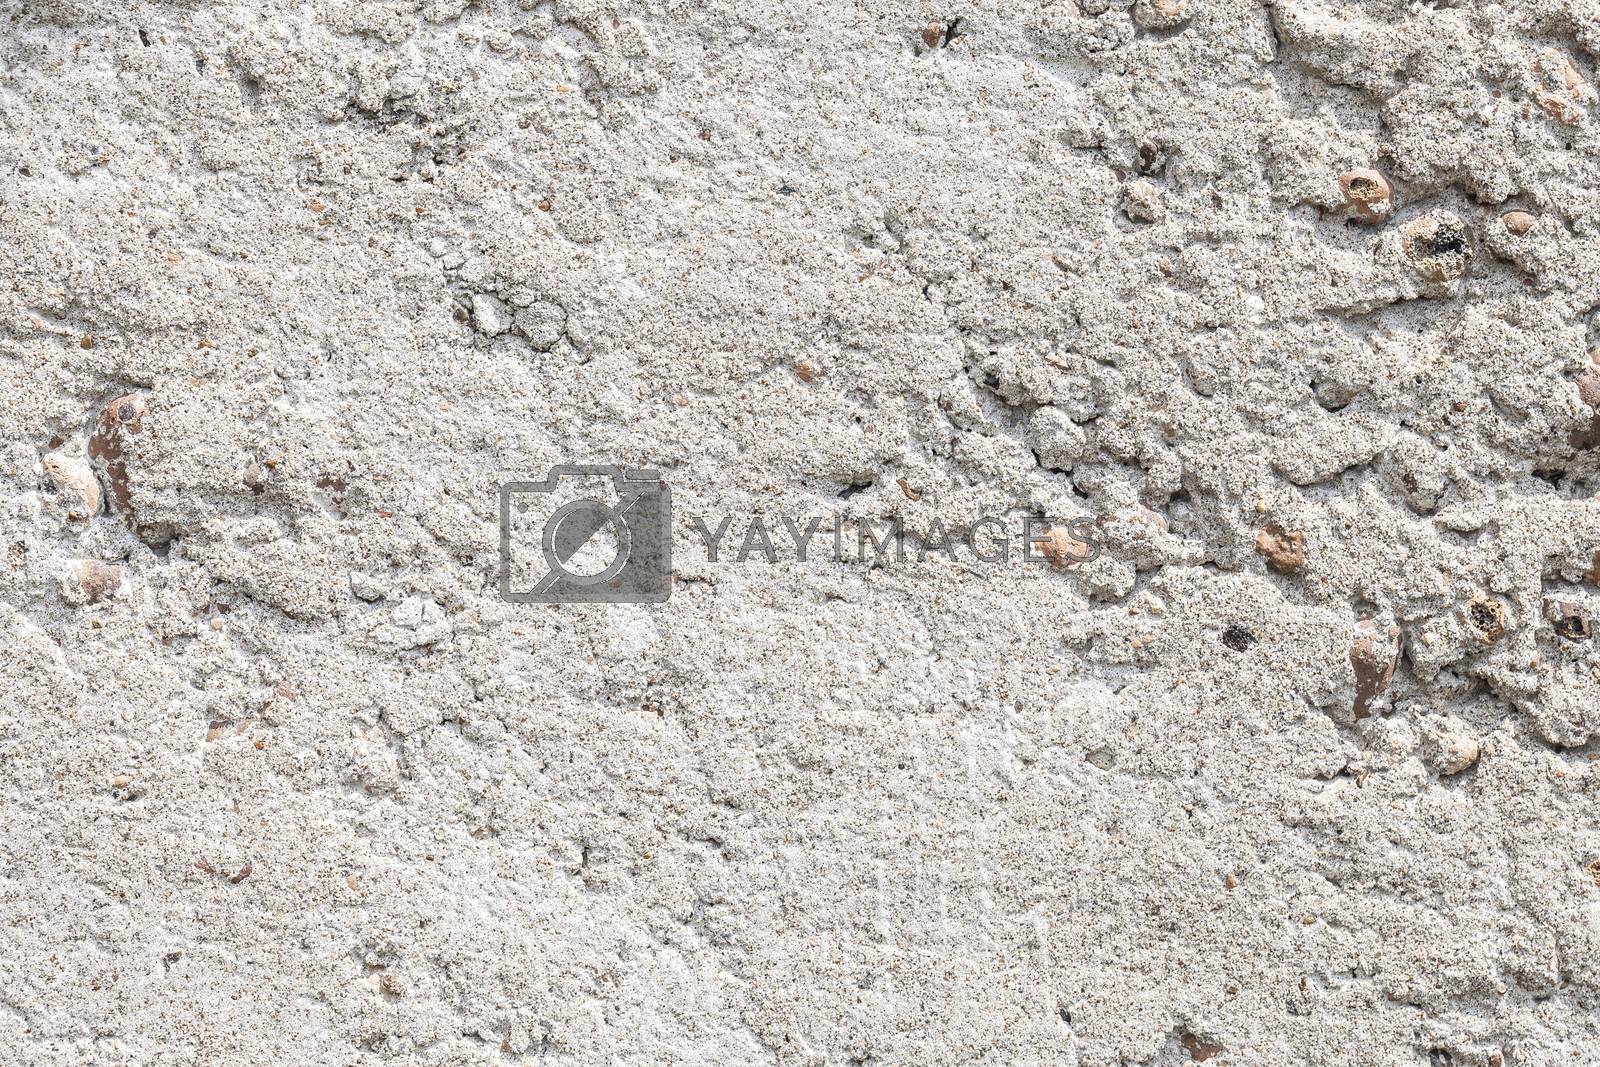 Royalty free image of Grungy White Concrete Wall Background by H2Oshka